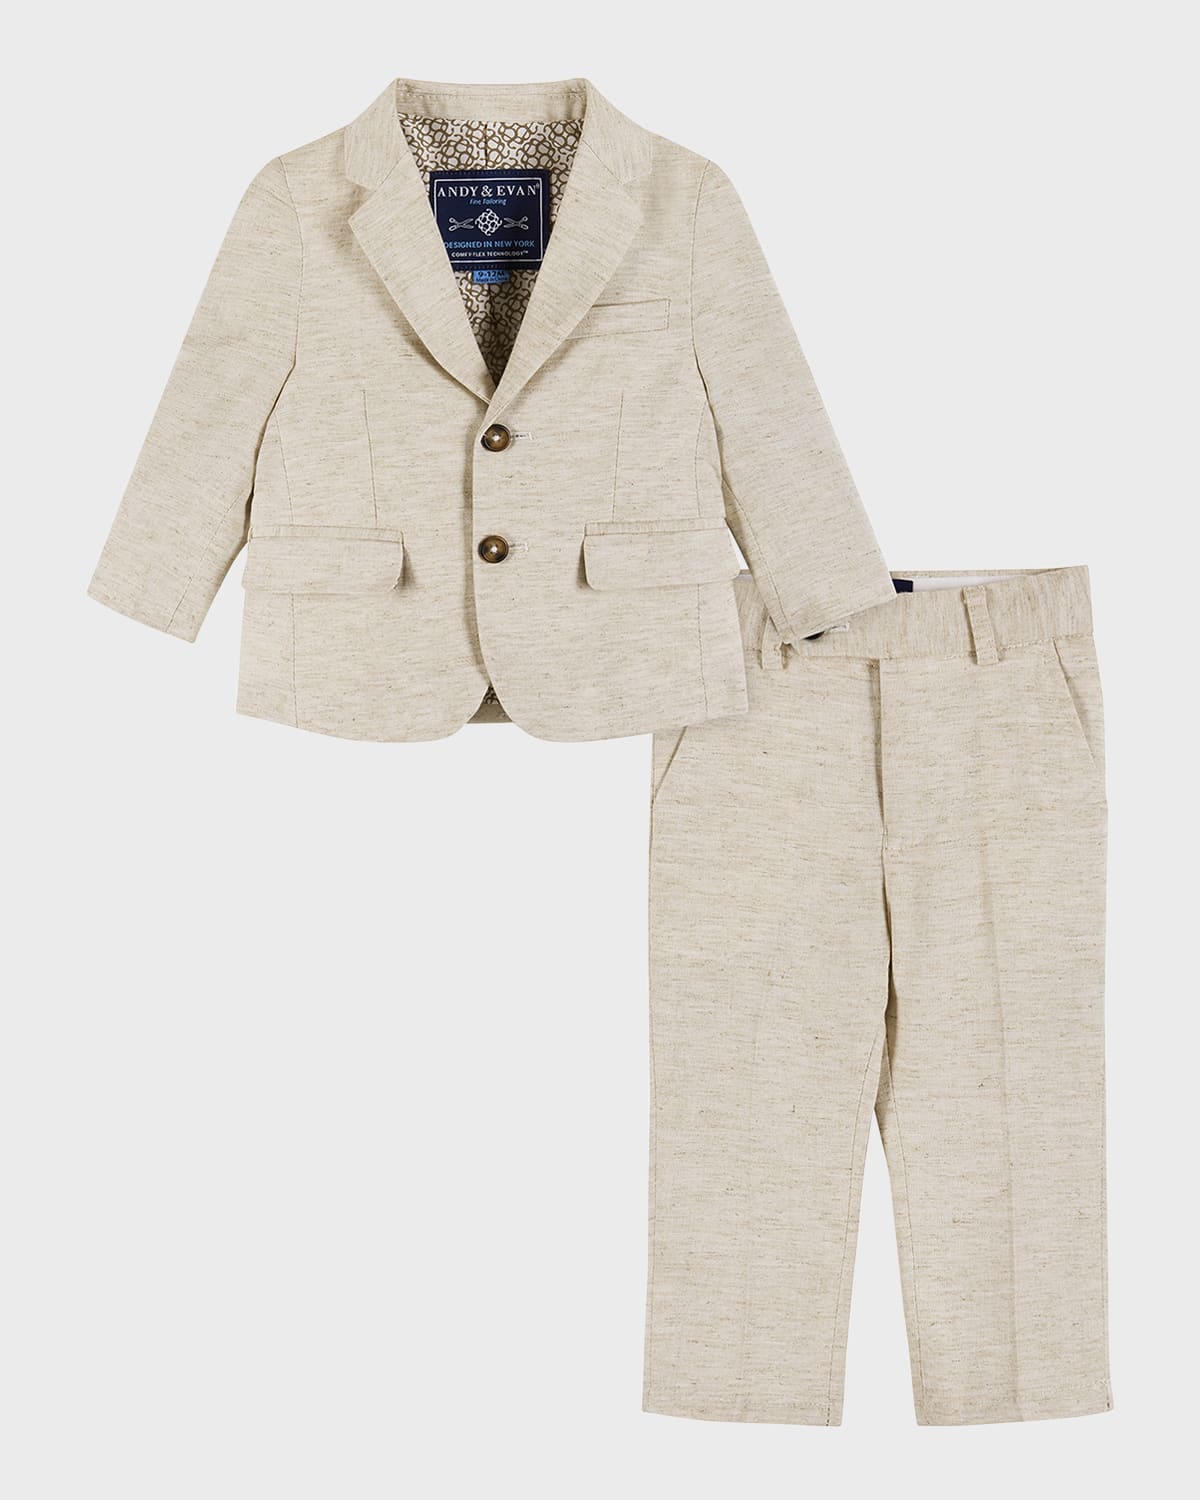 Andy & Evan Kids' Boy's Two-piece Suit Set In Gray